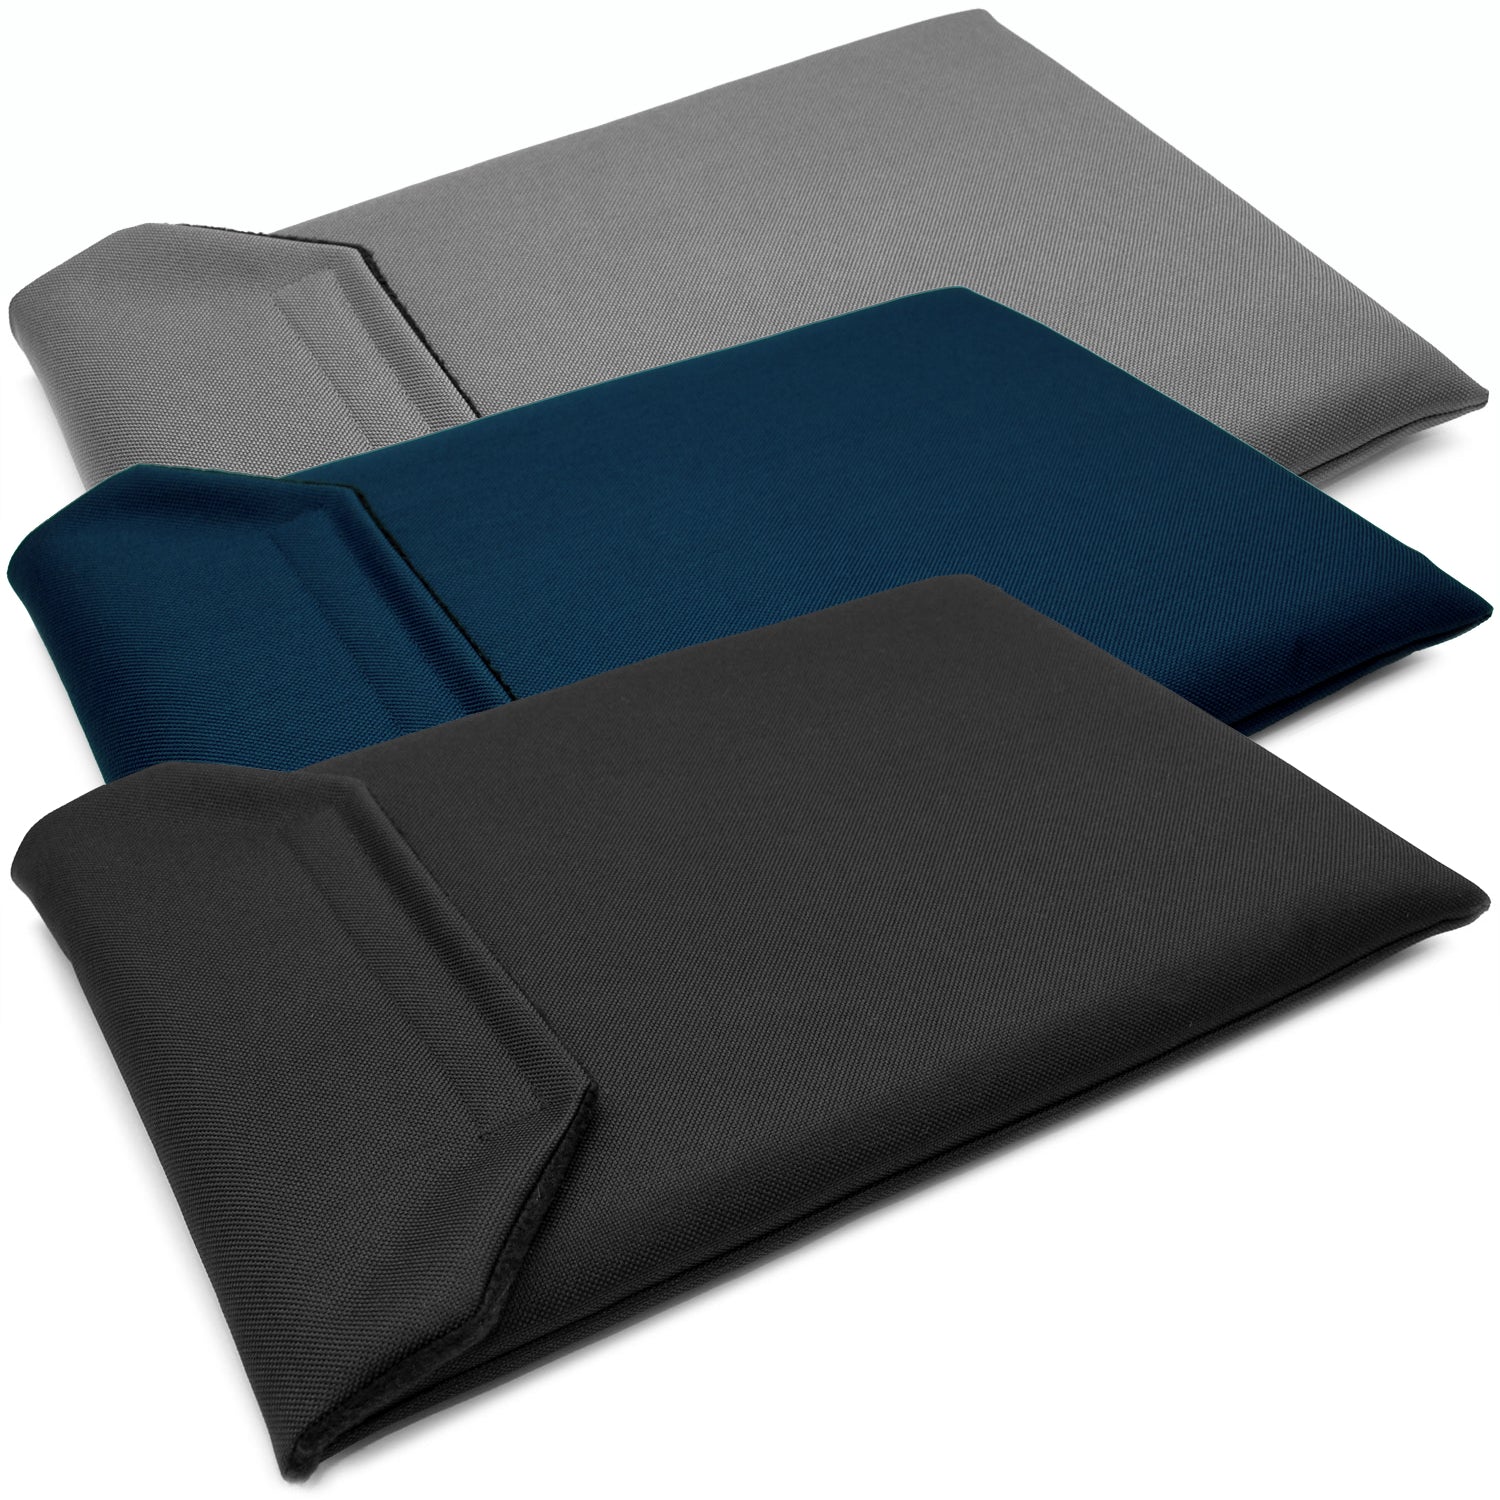 Dell XPS Laptop Sleeves and Cases